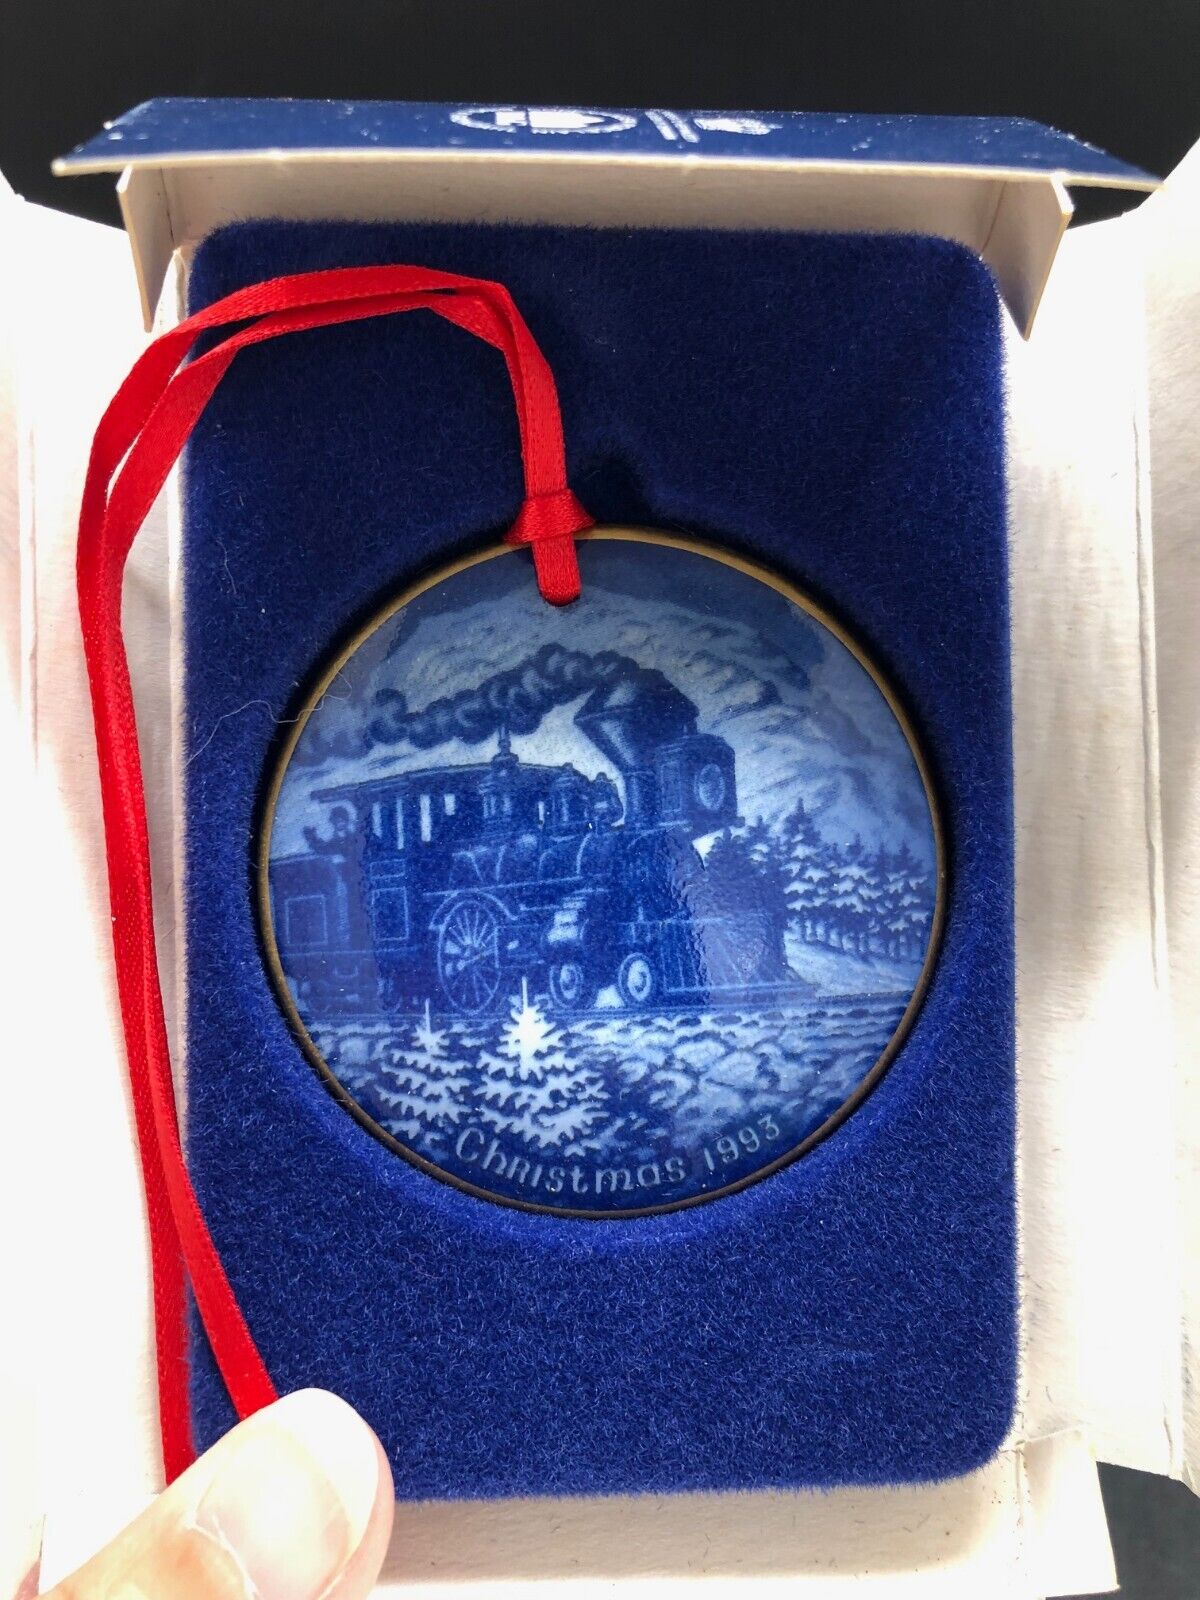 Vintage Bing & Grondahl 1993 Home for Christmas Plate Ornament, Limited Edition